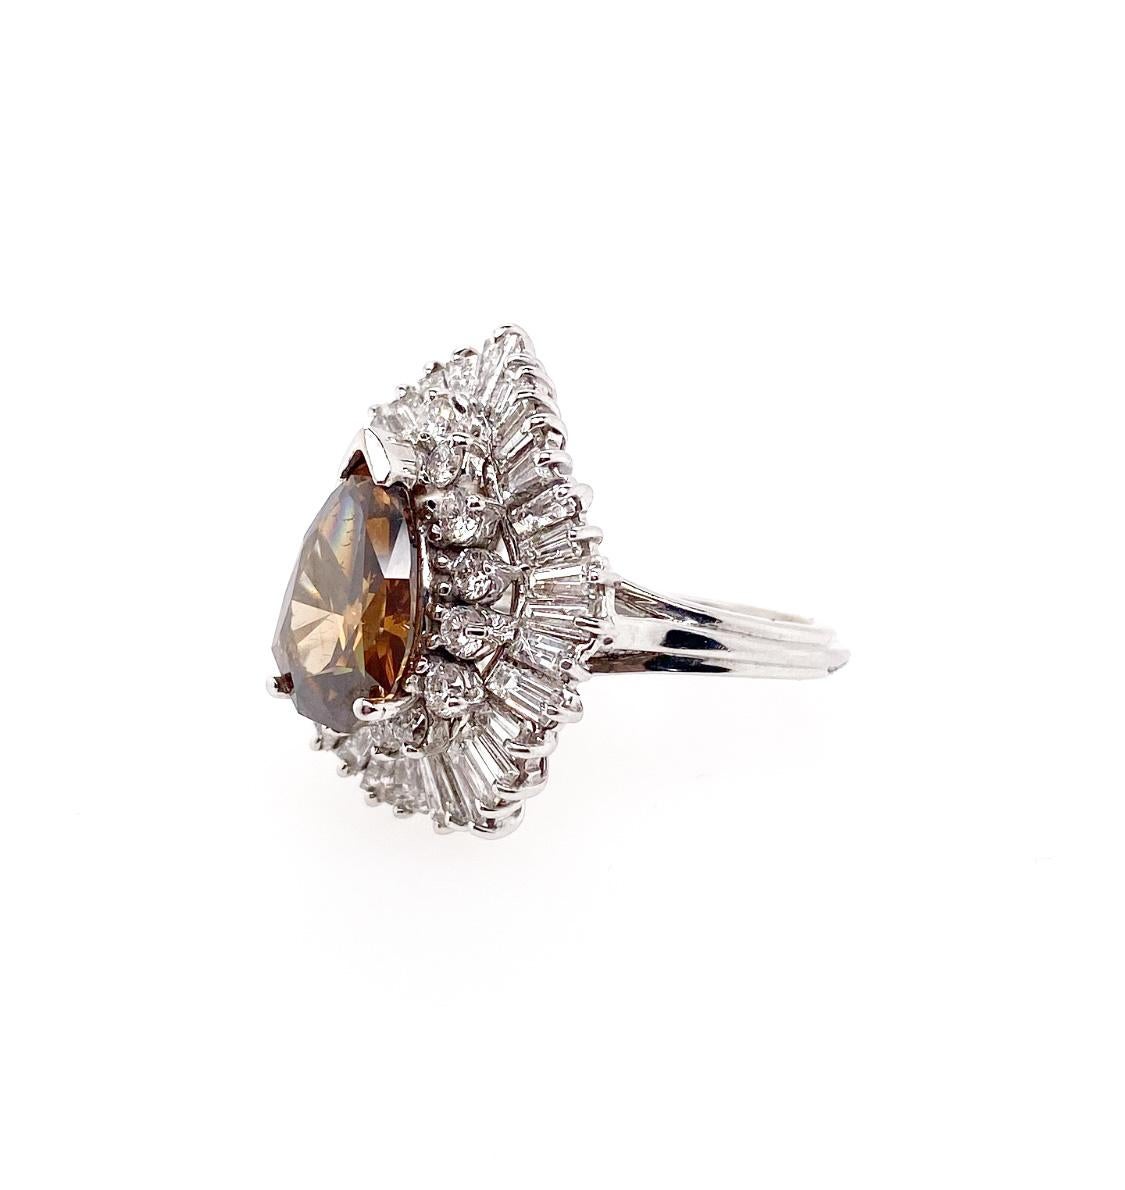 GIA certified 3.20 carat Fancy Brown Shield diamond is mounted as a center diamond of the ring. This rare diamond features unique and fabulous and is surrounded by brilliant round and baguette diamonds as a ballerina style. This ring is so stunning